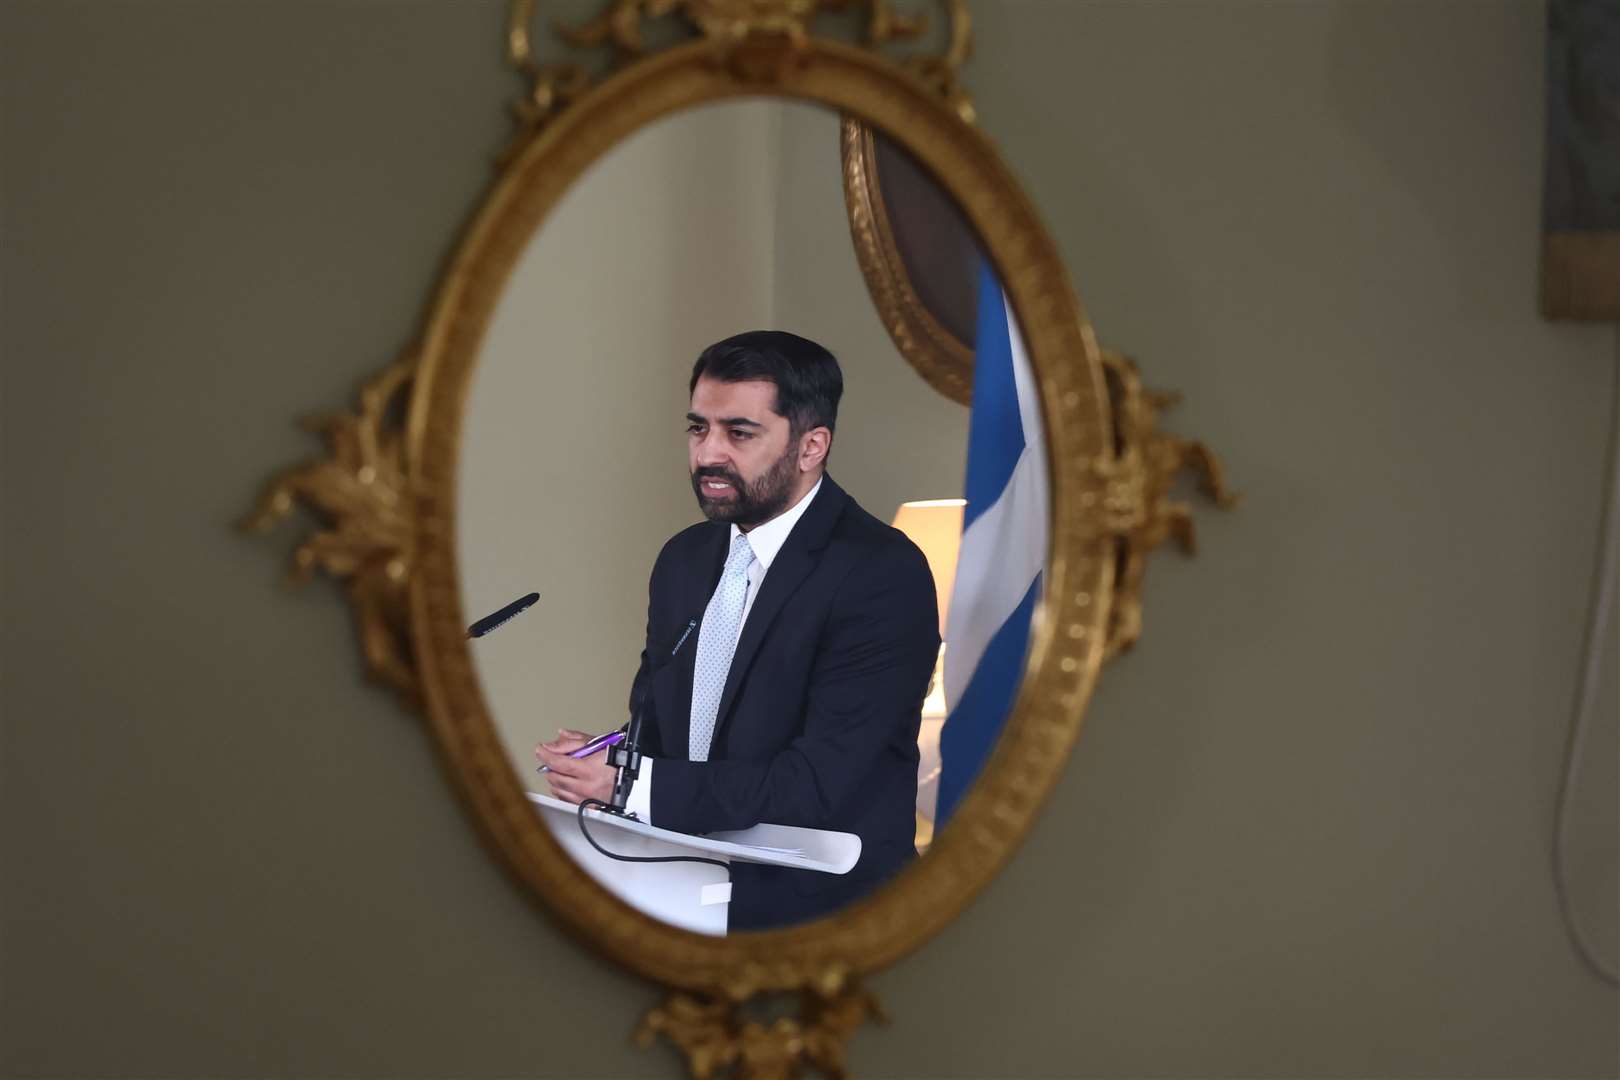 Humza Yousaf was said to be in ‘reflective’ mood after his decision to end a powersharing agreement sparked a no confidence motion in his leadership (Jeff J Mitchell/PA)